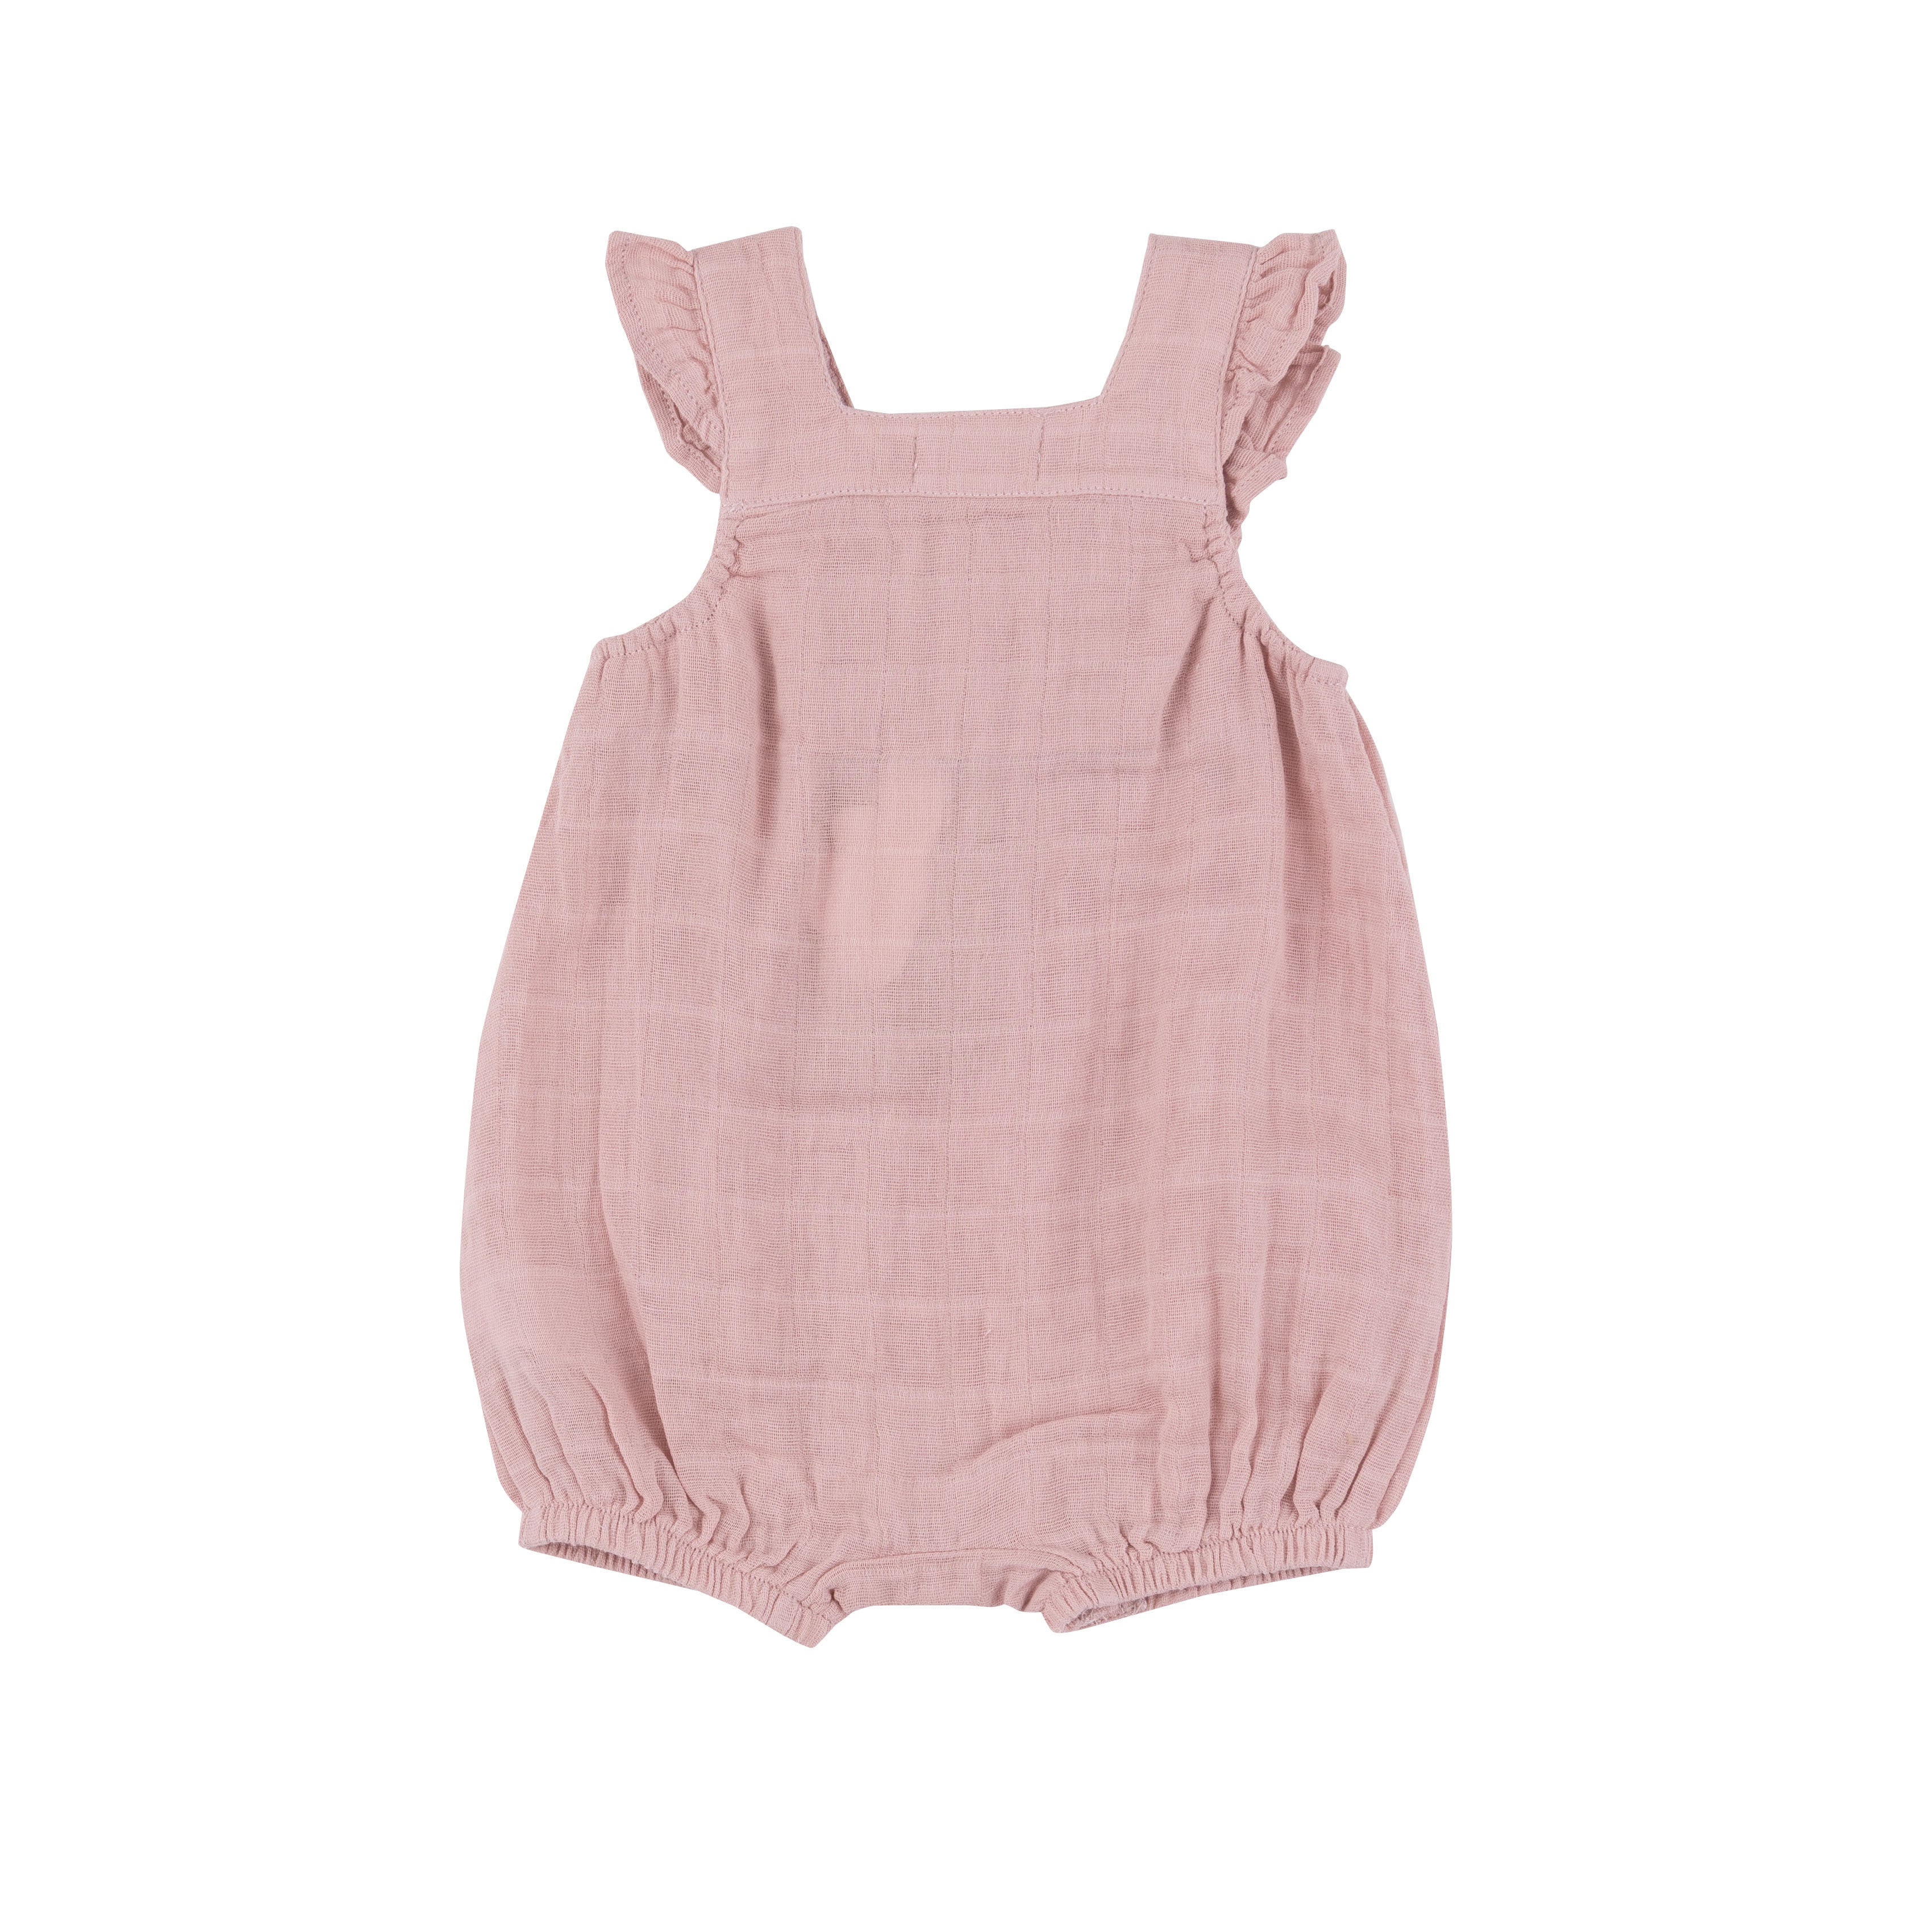 Smocked Front Overall Shortie - Dusty Pink Solid Muslin